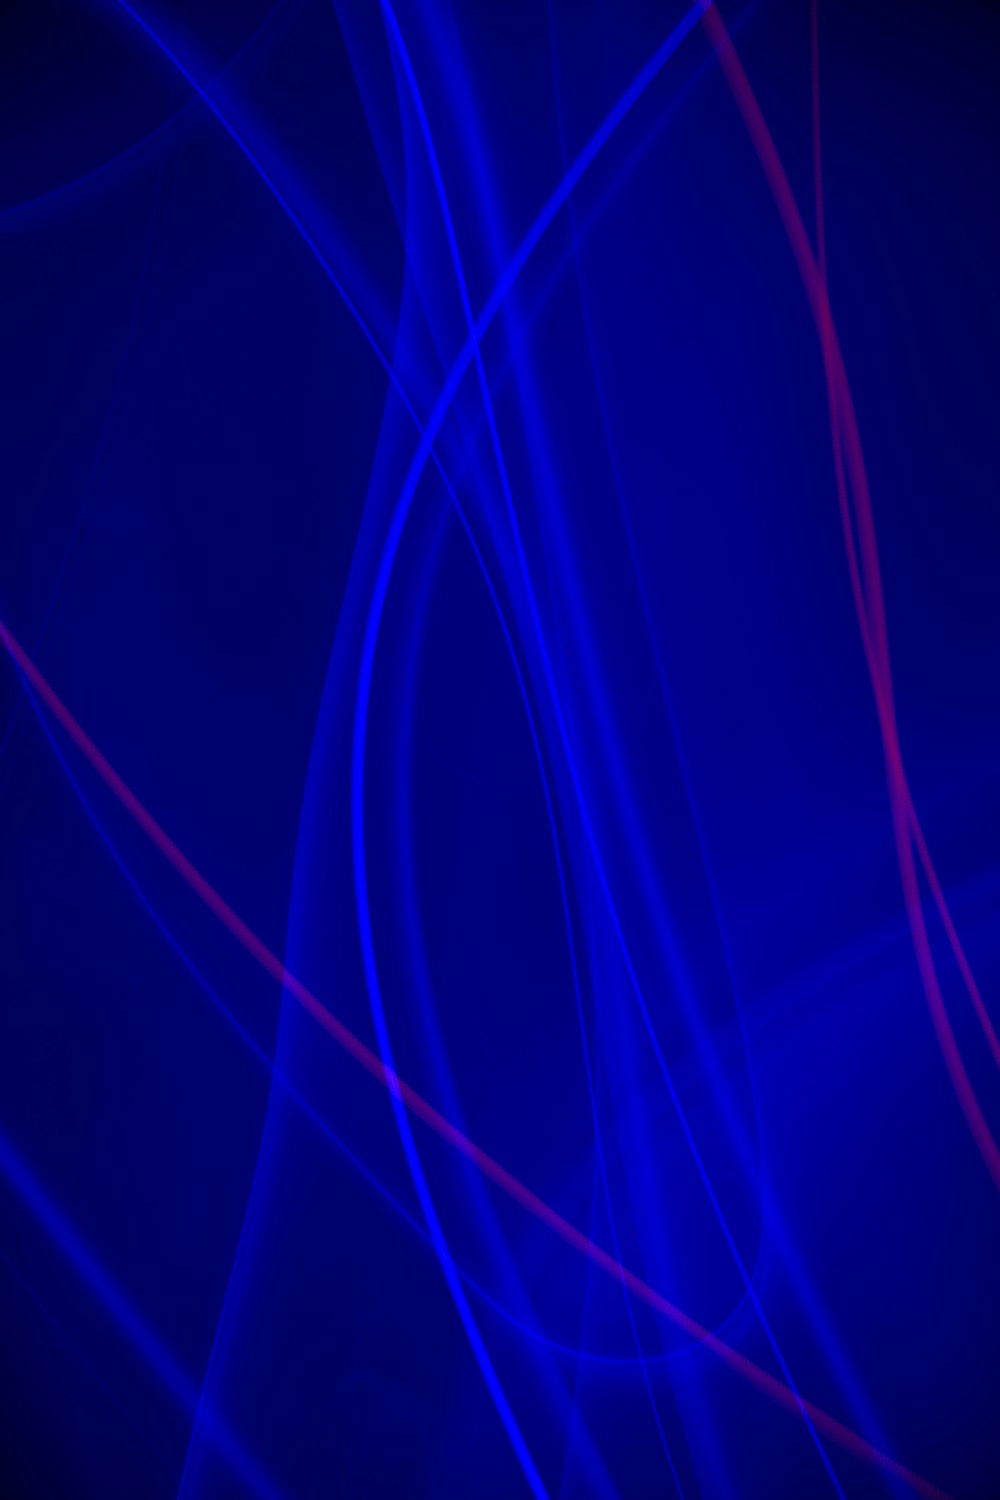 1000+ Abstract Blue Background Pictures | Download Free Images on ...